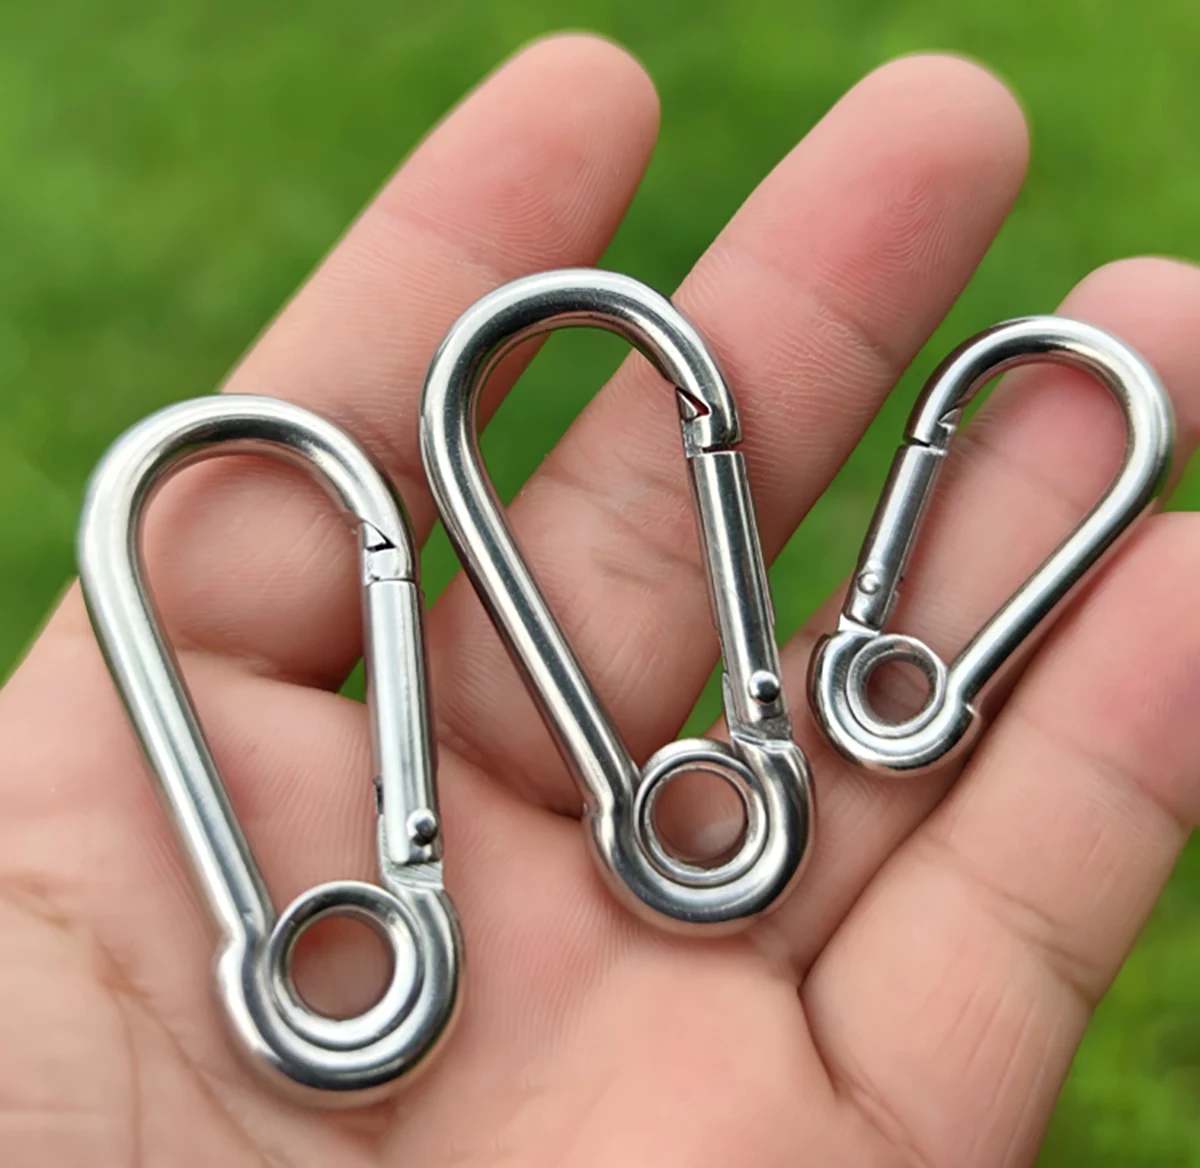 https://ae01.alicdn.com/kf/S7dd93c86bafb46199f66d9f705fe45bad/1Pcs-304-316-Stainless-Steel-Carabiner-Carbine-Snap-Hook-with-Eyelet-Spring-Buckle-Key-Ring-M4.jpeg